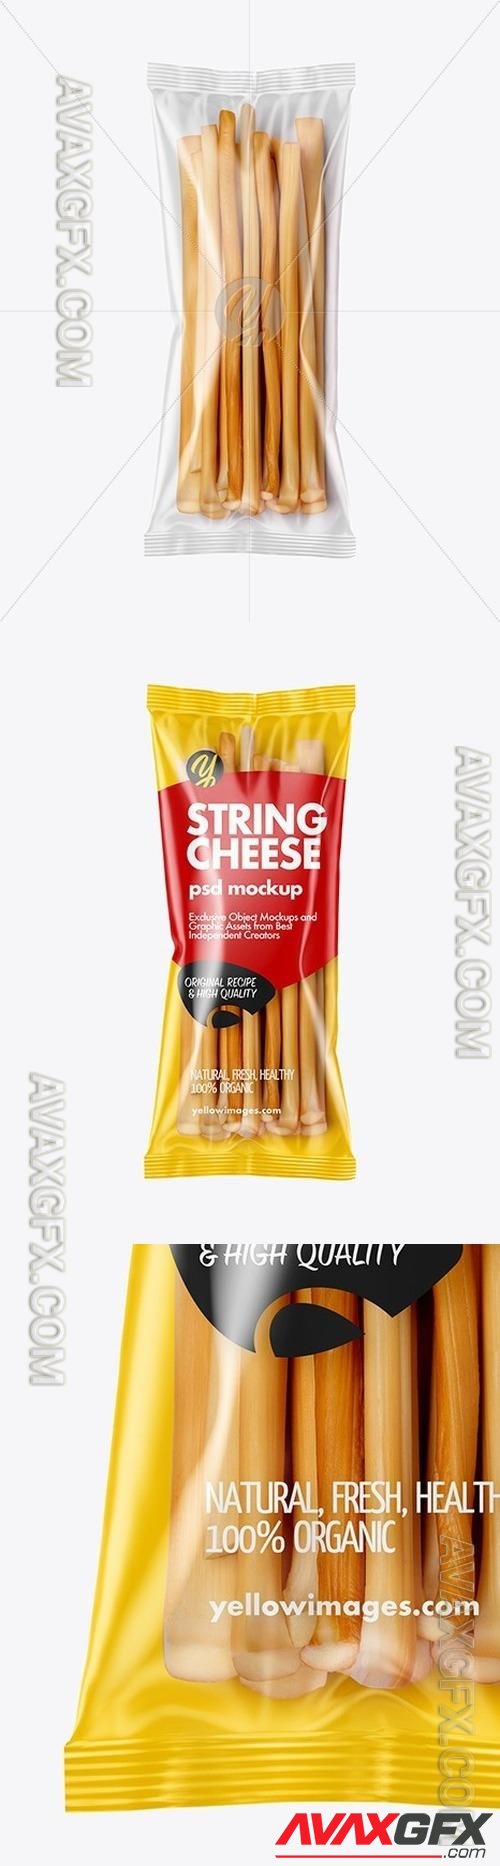 Plastic Bag With String Cheese Sticks Mockup 56544 TIF